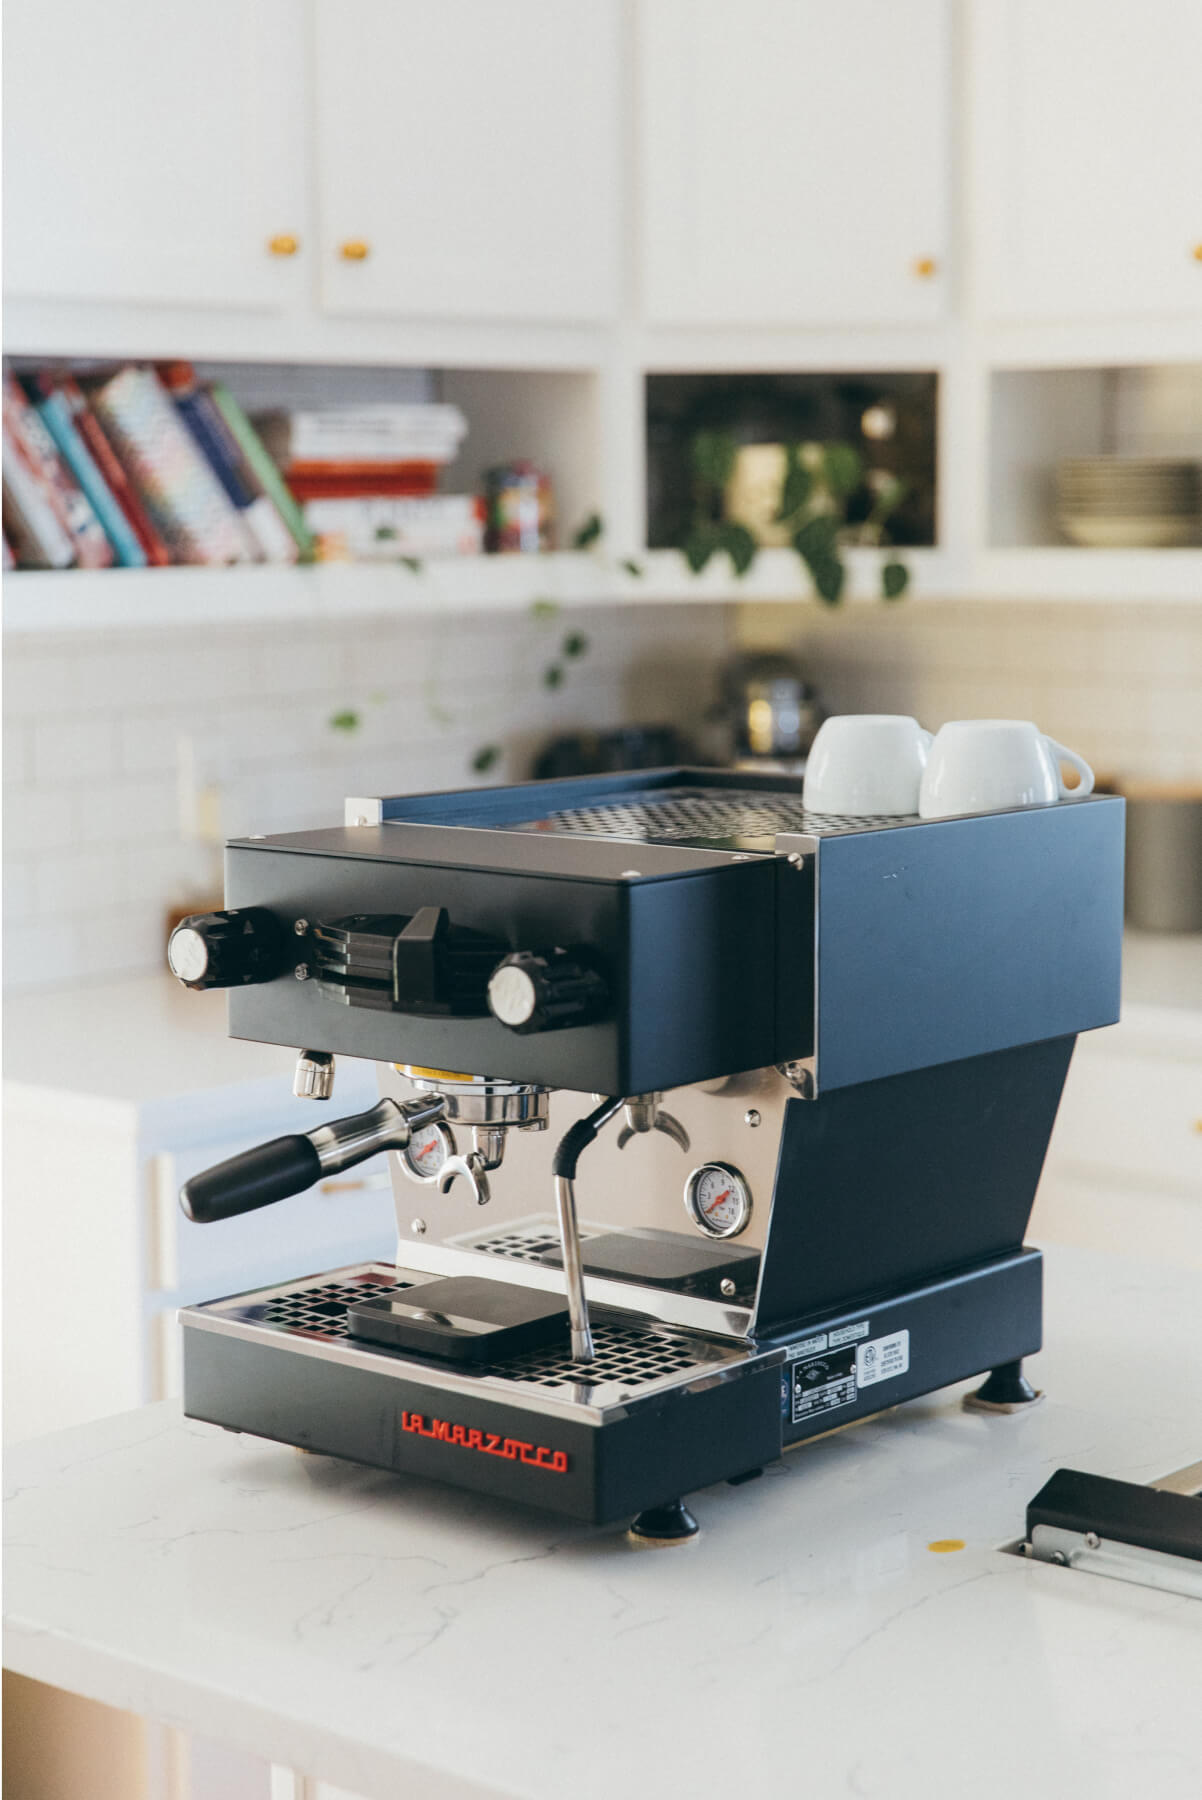 Brew-by-Weight Scale + IoT Kit - La Marzocco Home